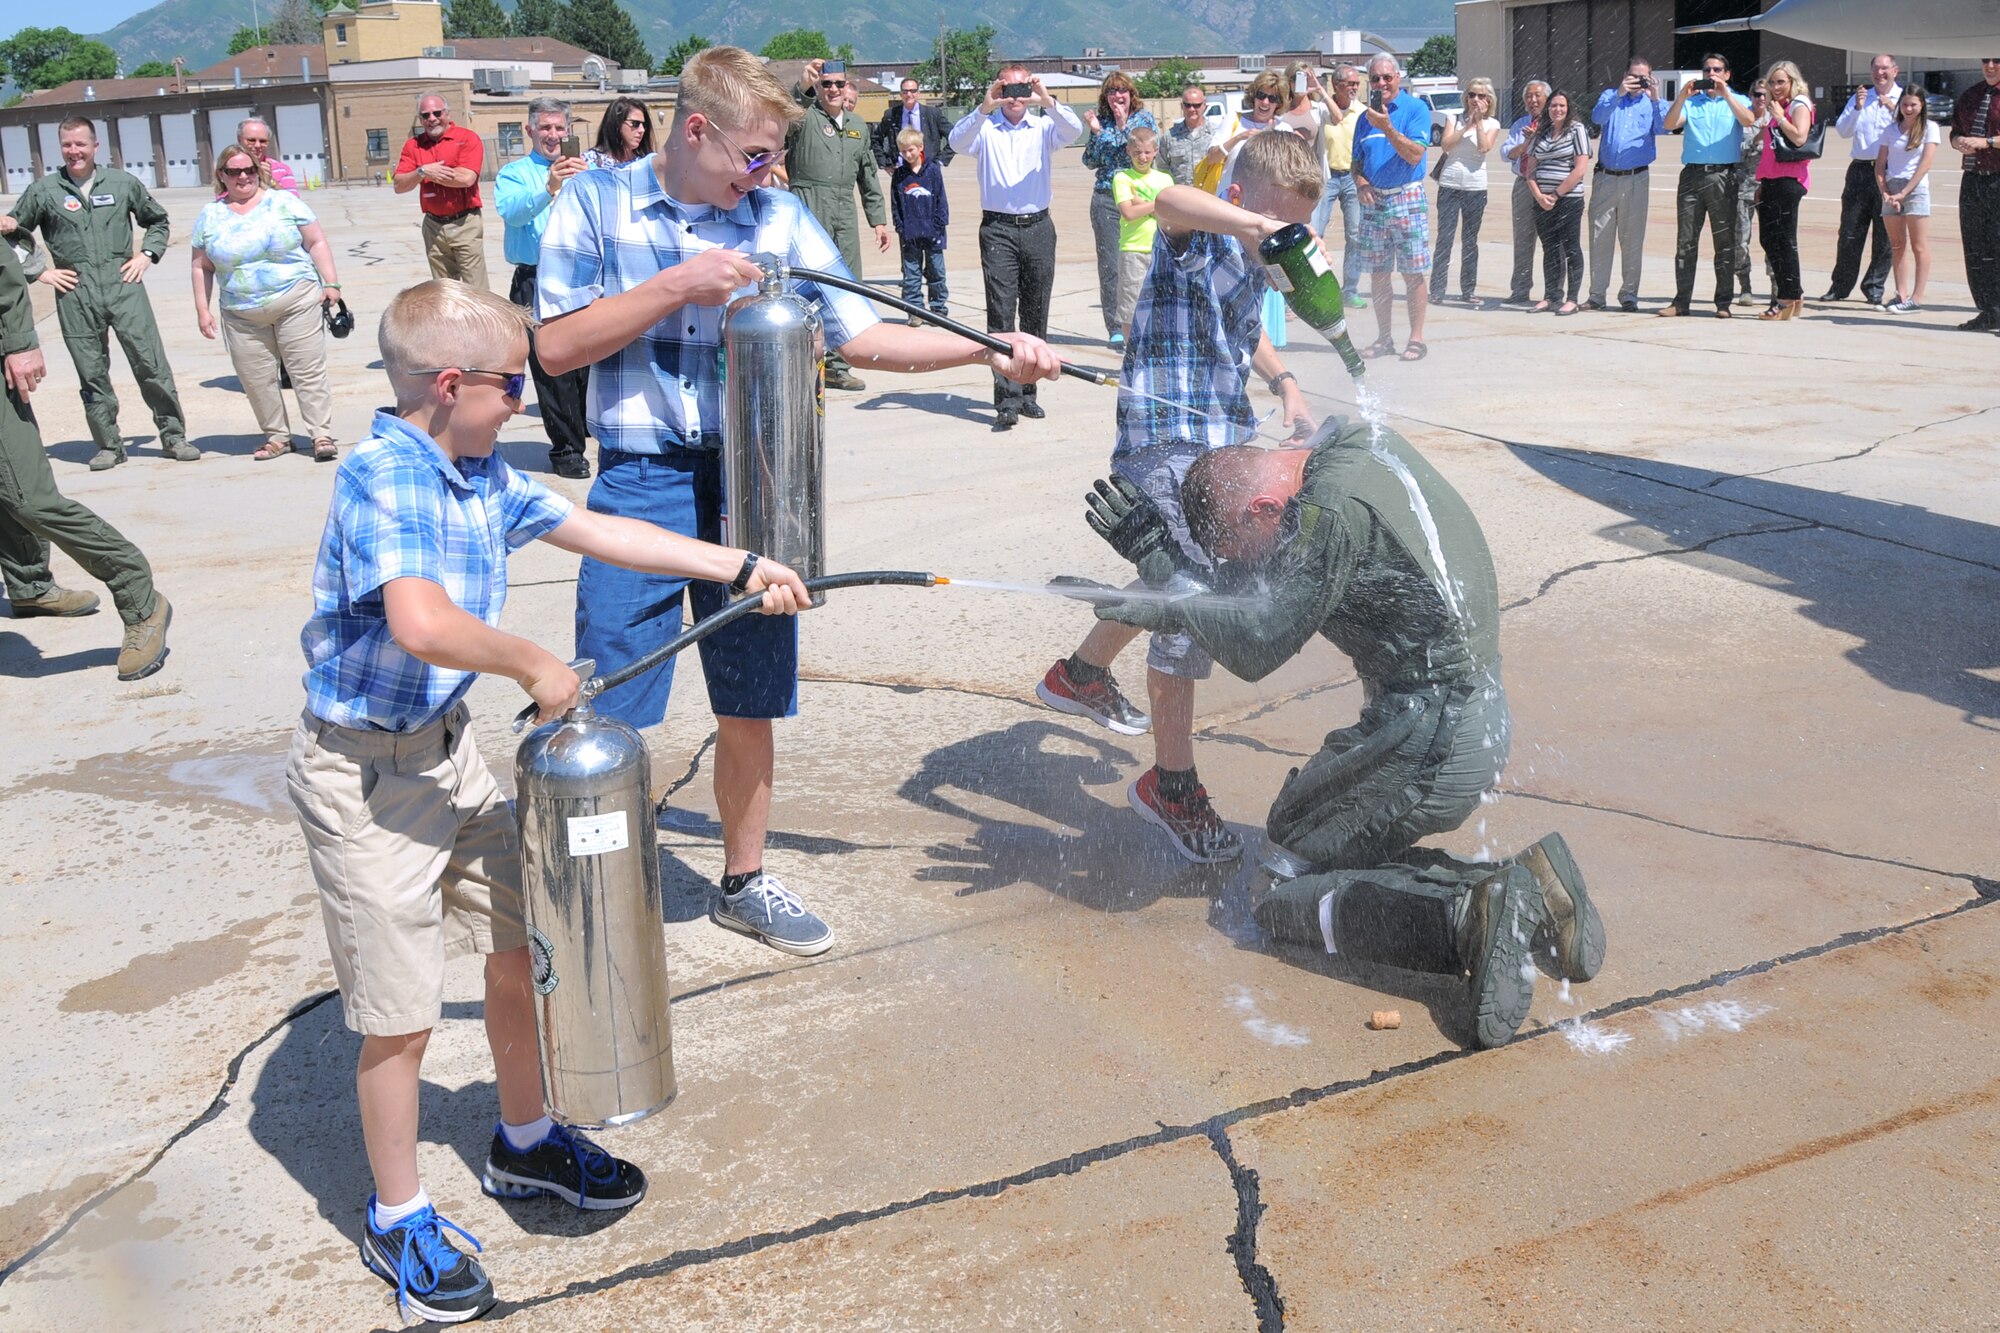 388th Fighter Wing Commander Col. Lance Landrum is taped up and soaked immediately after his "fini flight", an Air Force tradition in which pilots celebrate their last flight as part of the unit. (U.S. Air Force photo by Todd Cromar) 